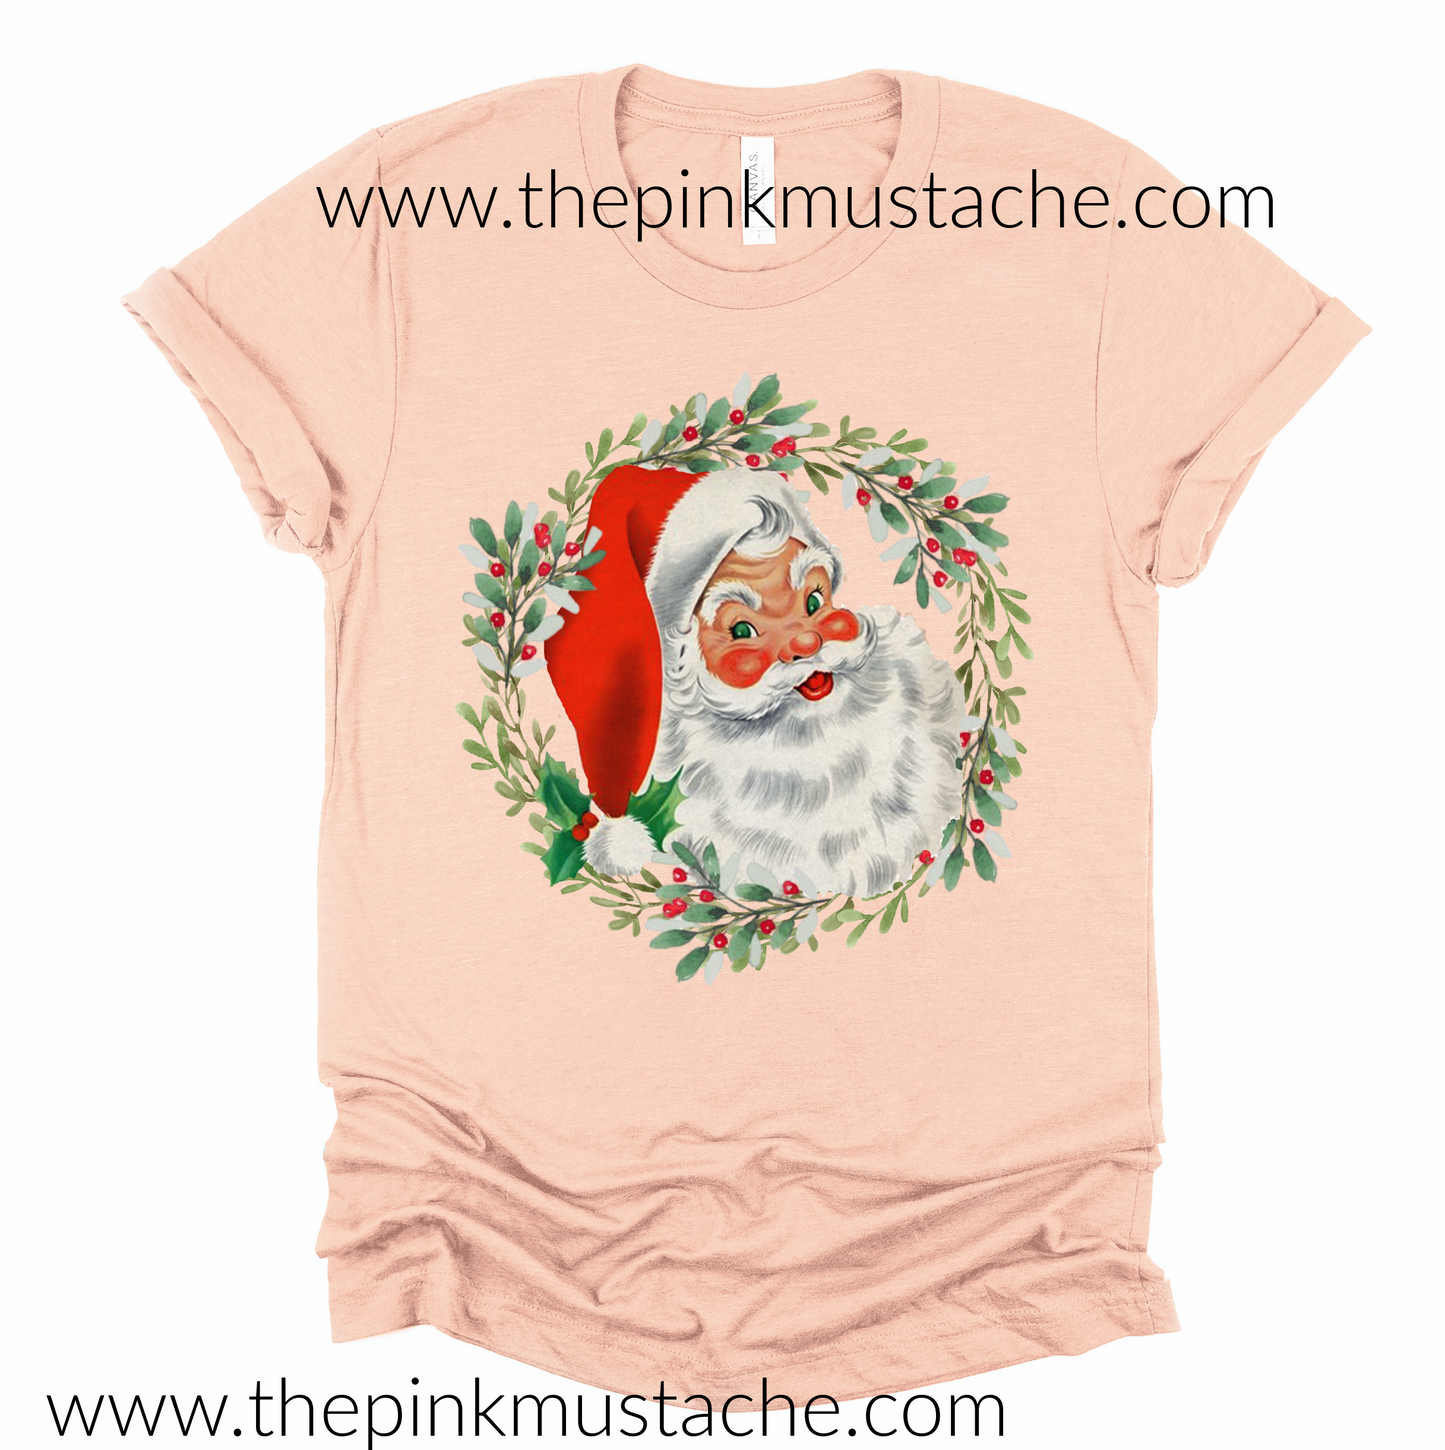 Vintage Santa Christmas Wreath Soft Style Tee /Christmas Tees / Youth and Adult Sizes Available